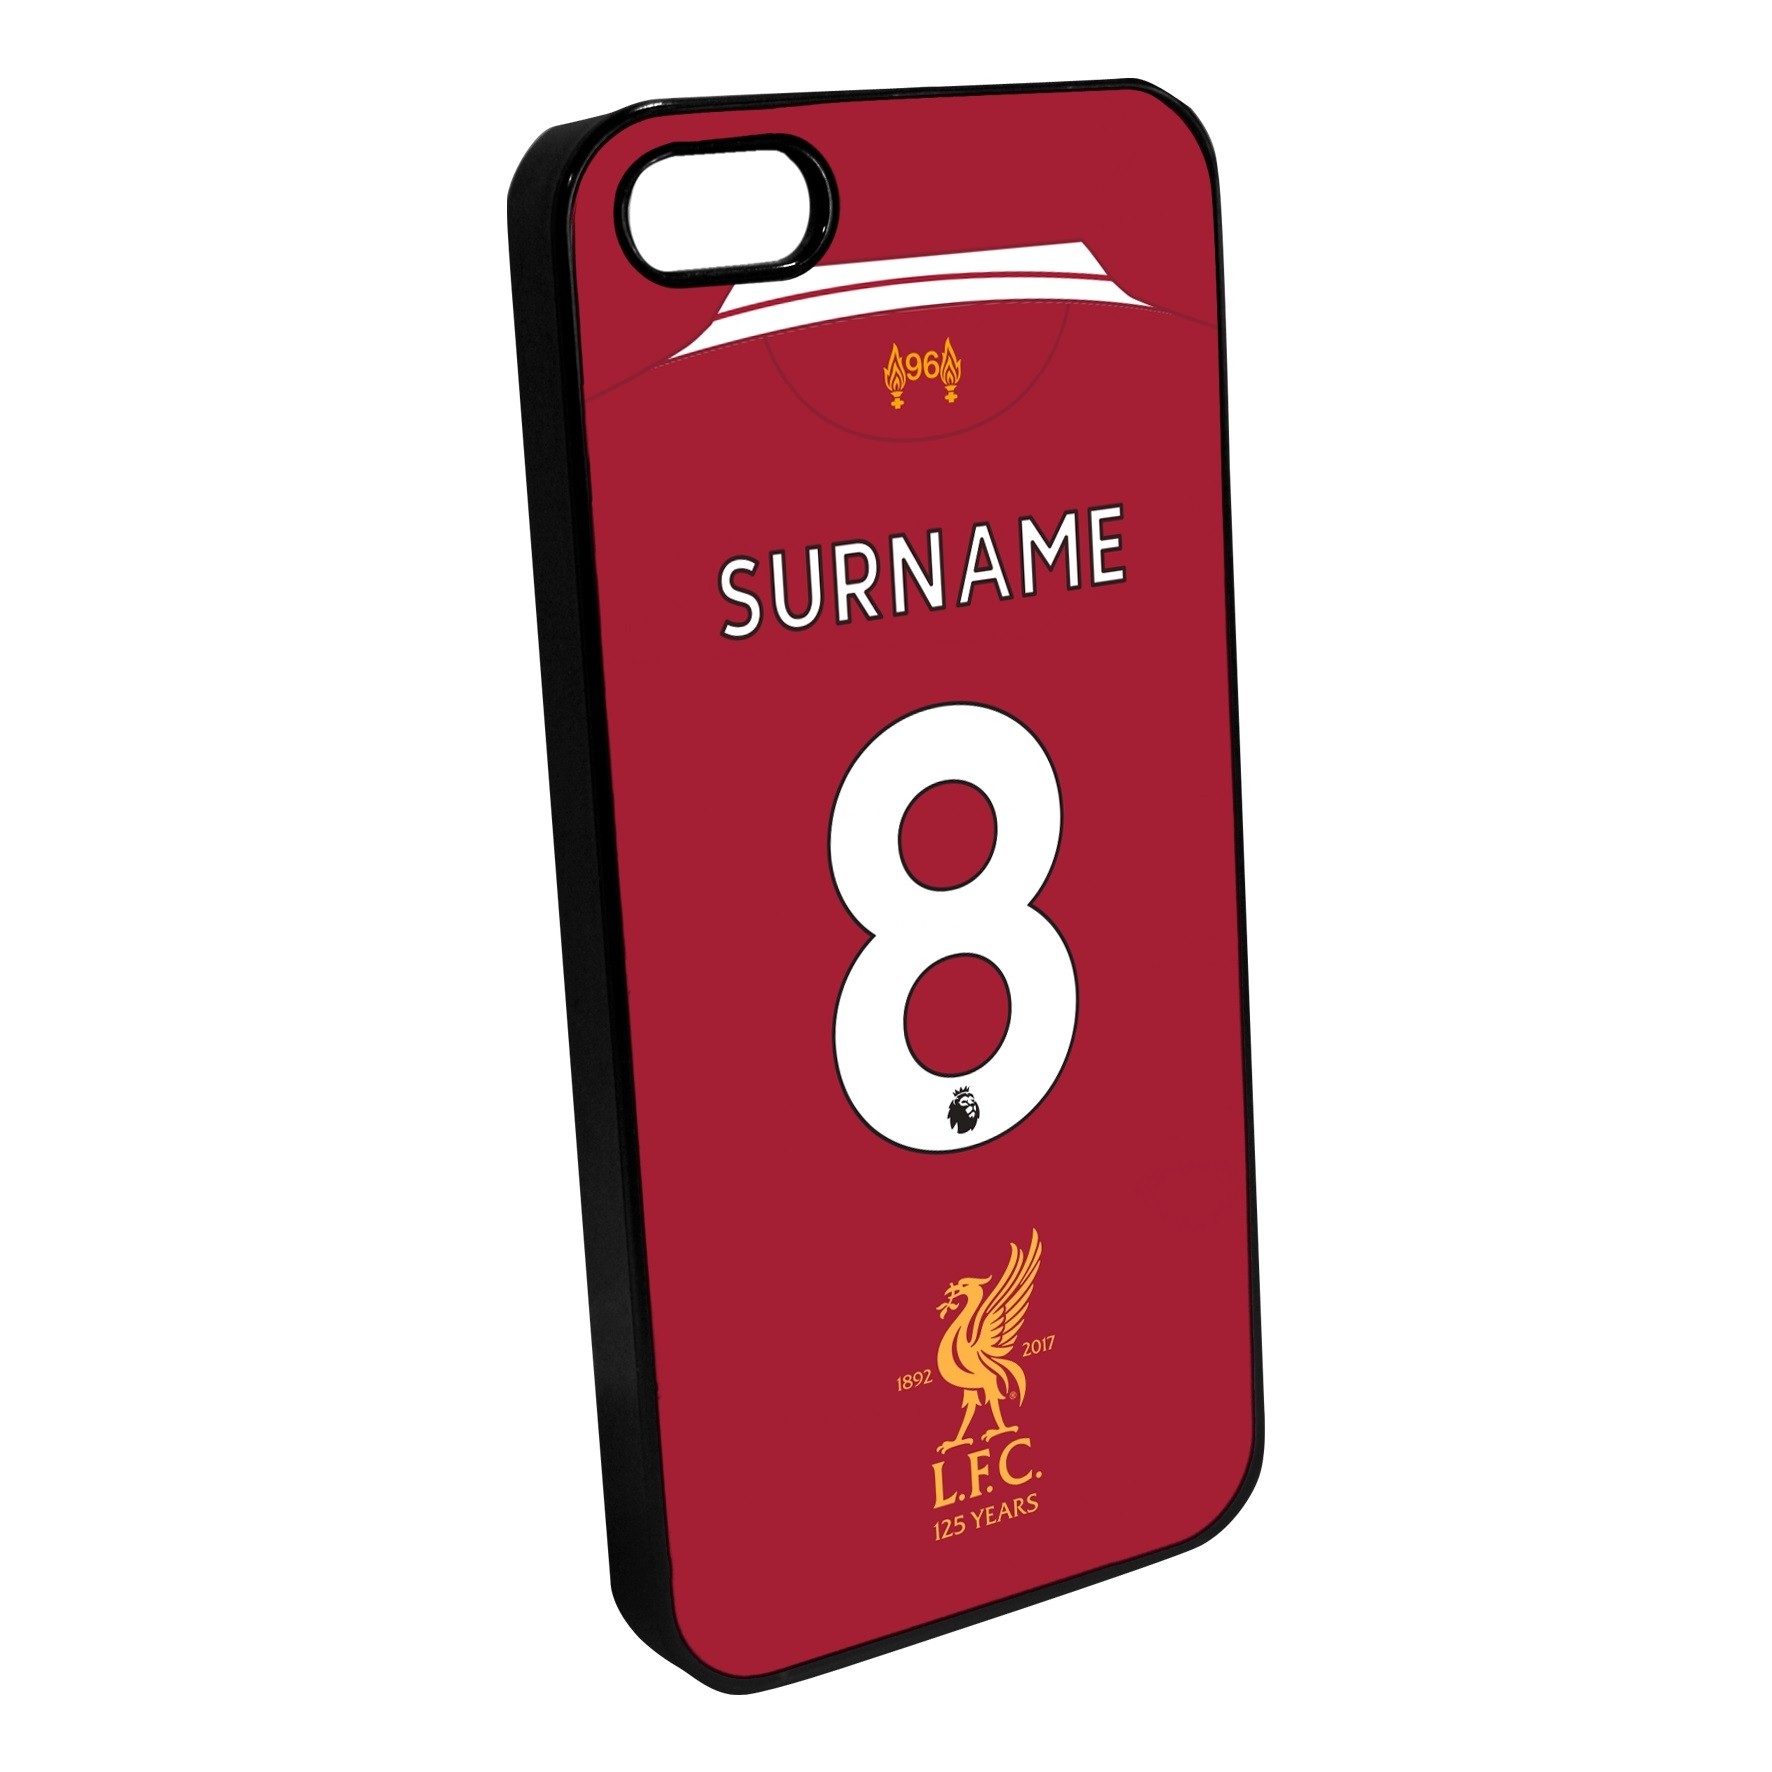 LFC Personalised Home Kit iPhone 5 Case 17/18